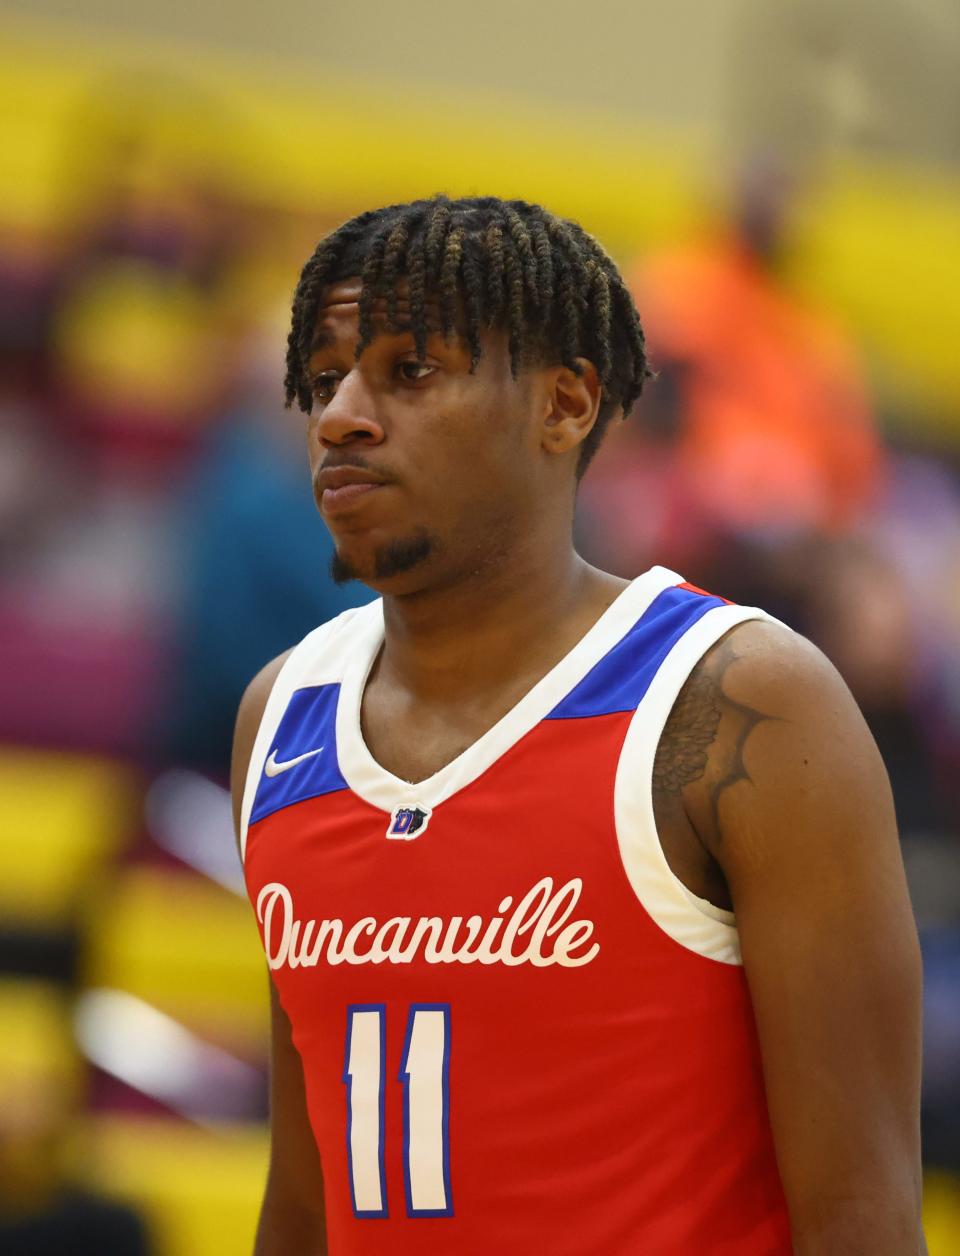 Duncanville High School Panthers guard Aric Demings (11) against the Cardinal Hayes Cardinals during the HoopHall West basketball tournament at Chaparral High School on Dec 8, 2022; Scottsdale, AZ, USA.